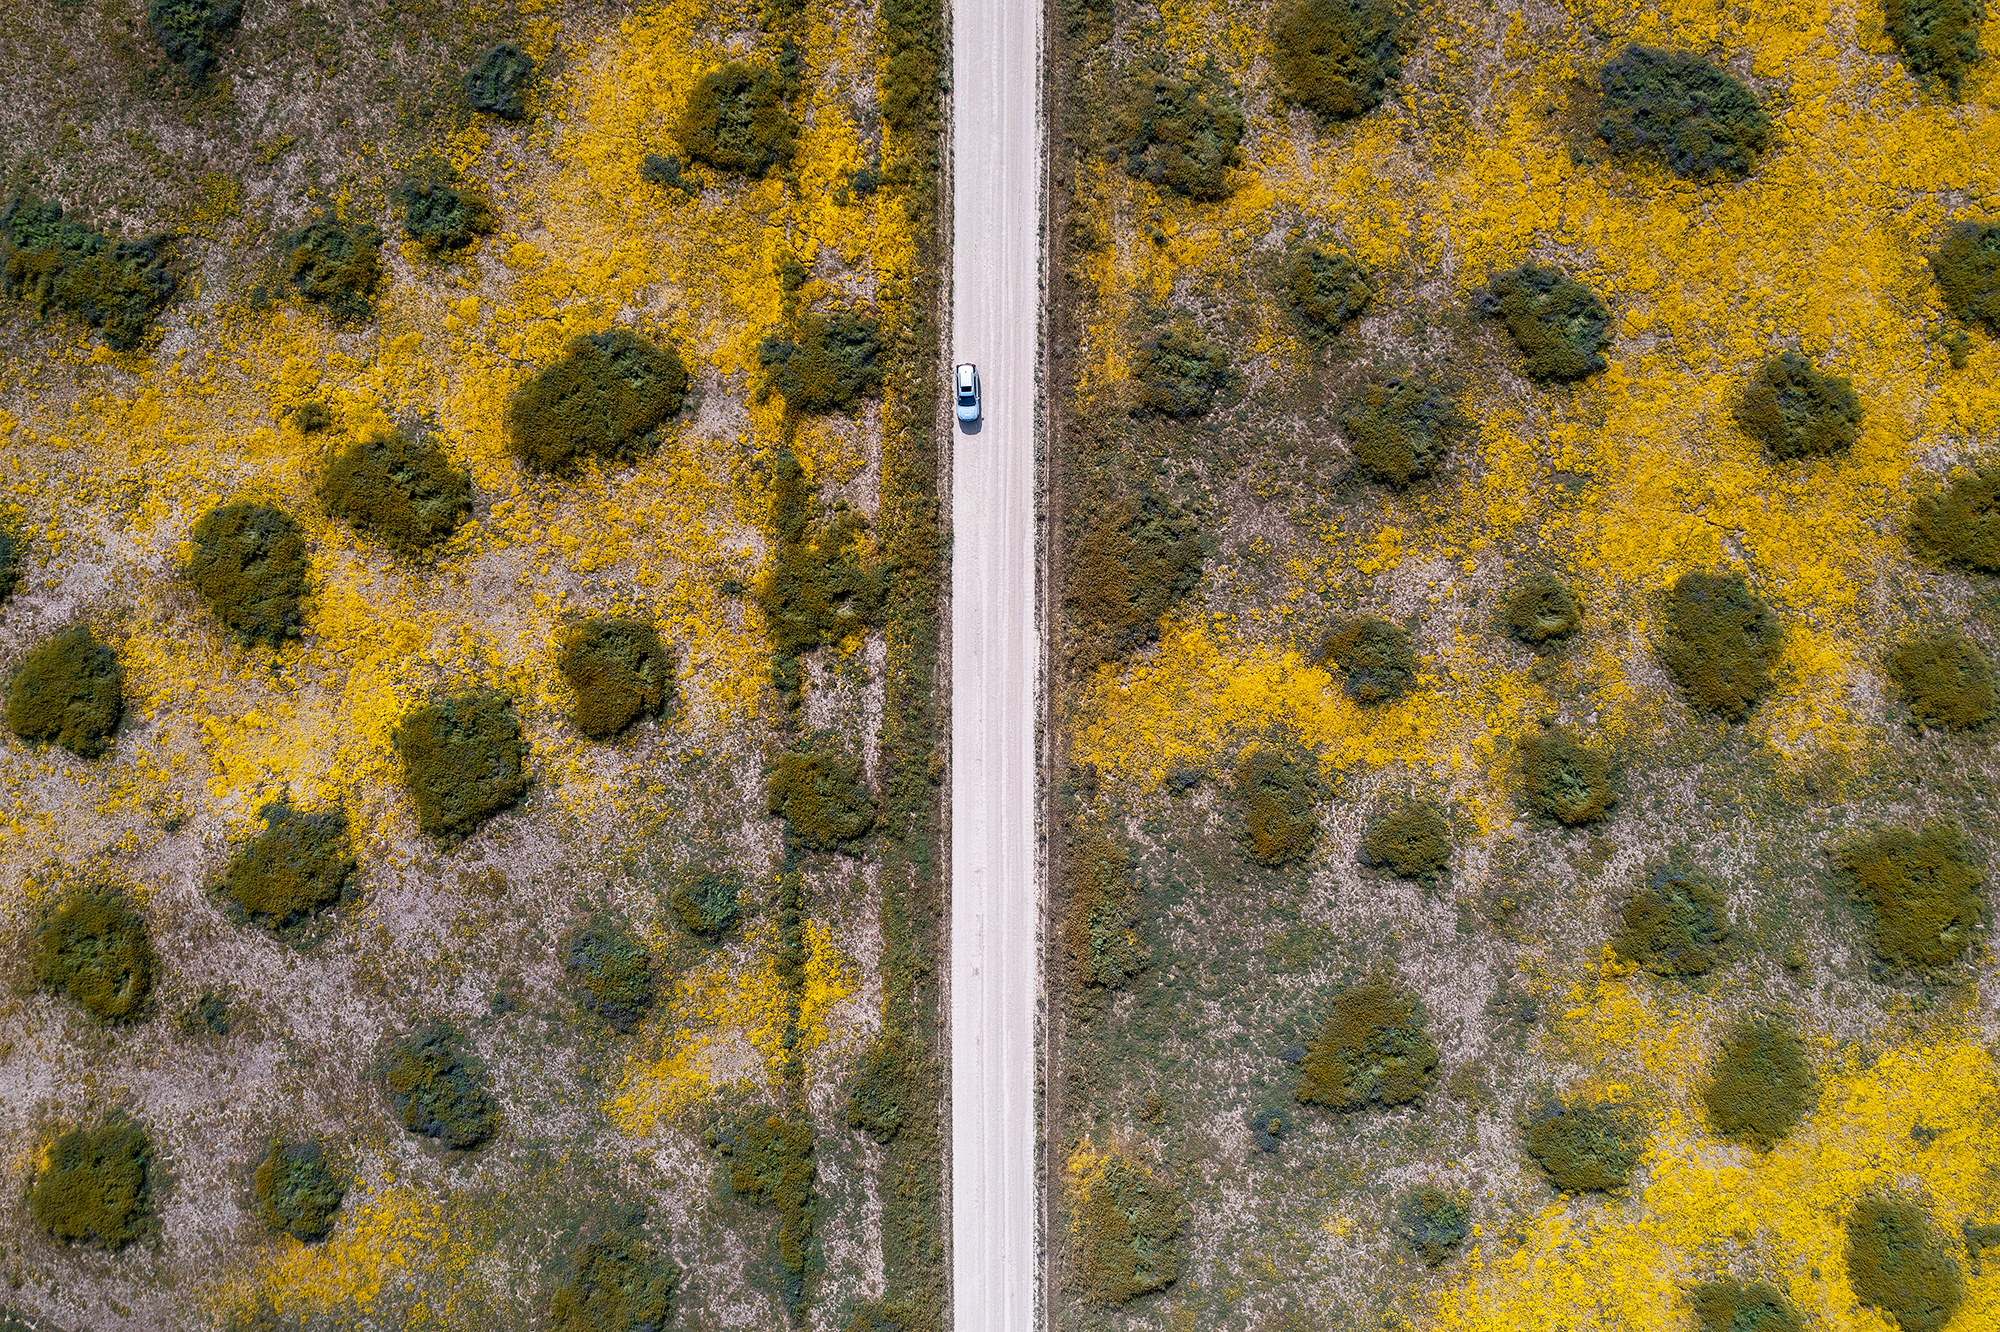 An aerial view of a narrow road bisecting a green landscape dotted by splotches of yellow flowers